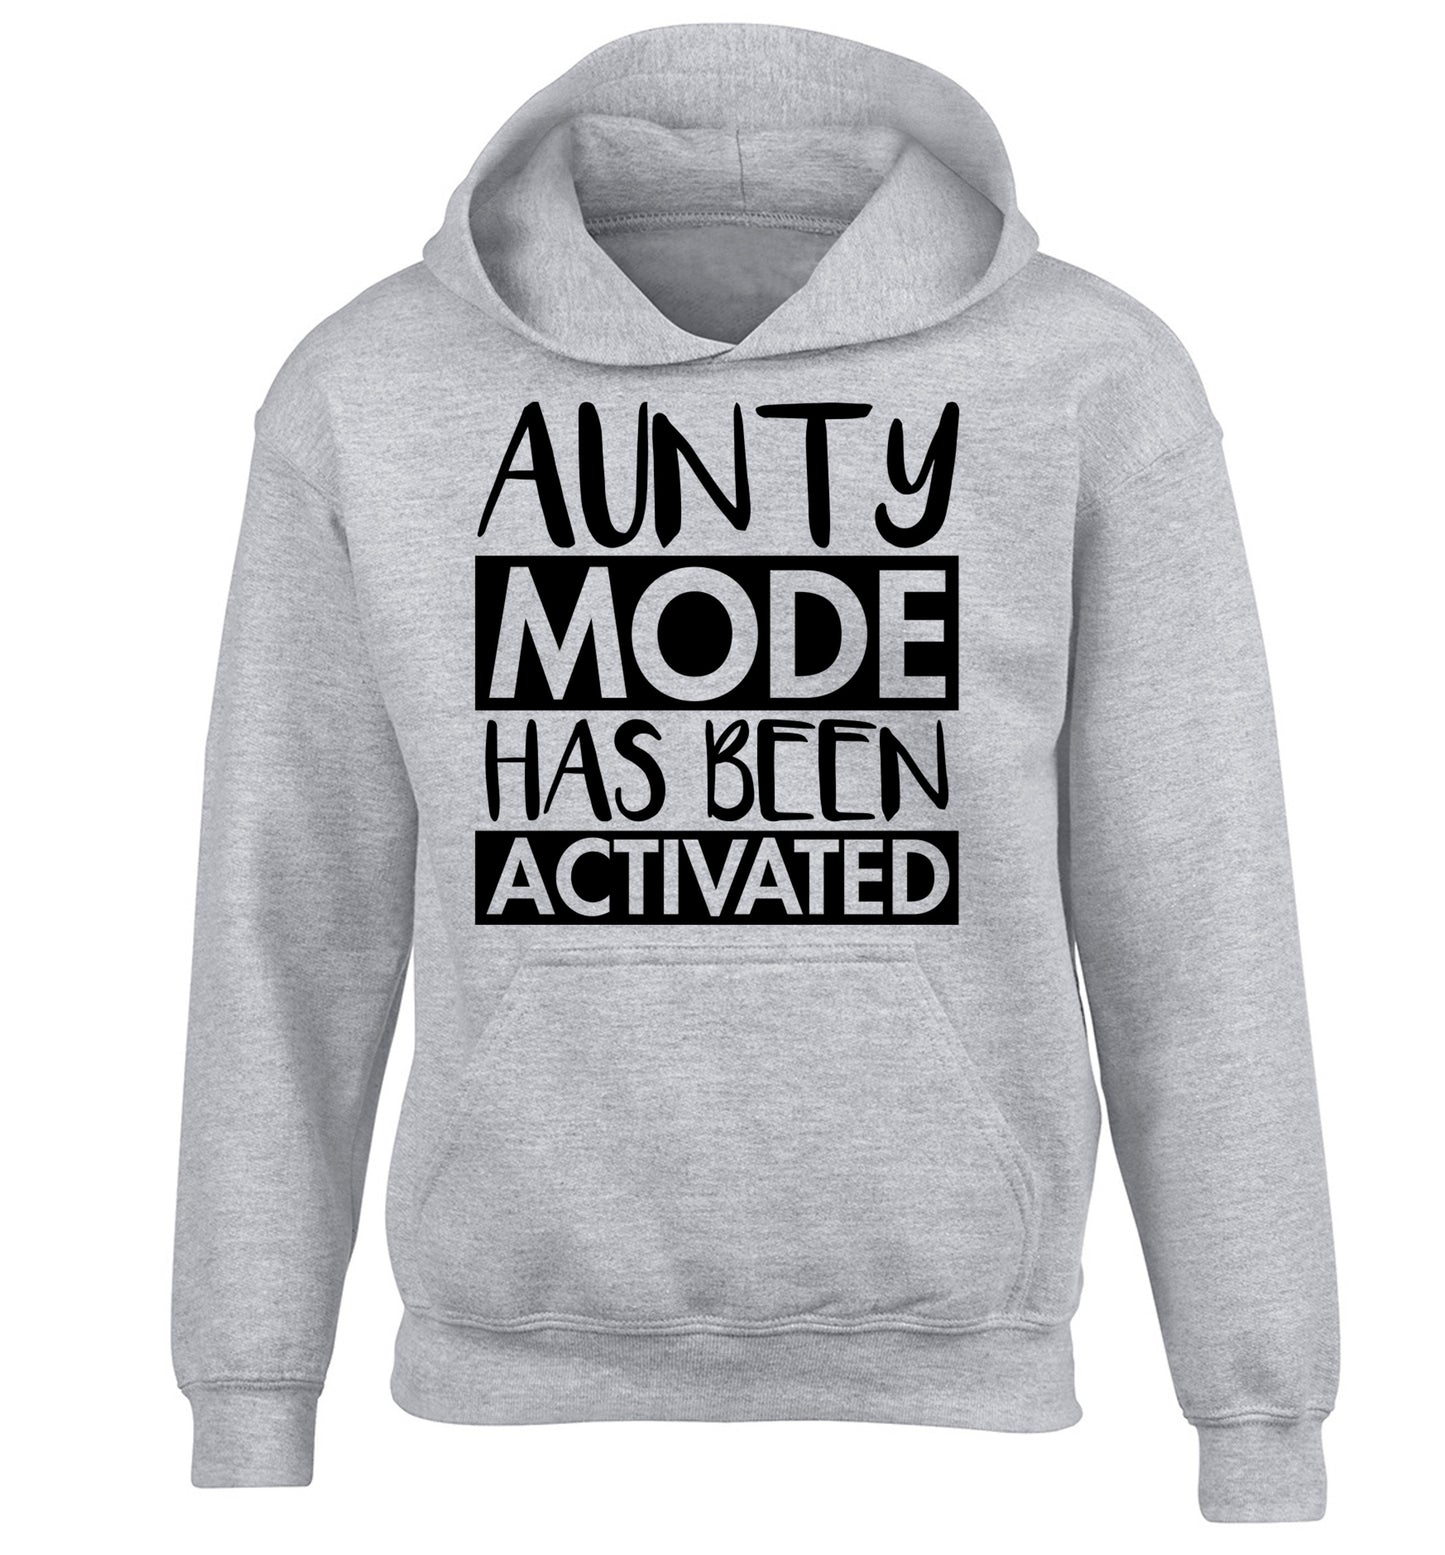 Aunty mode activated children's grey hoodie 12-14 Years